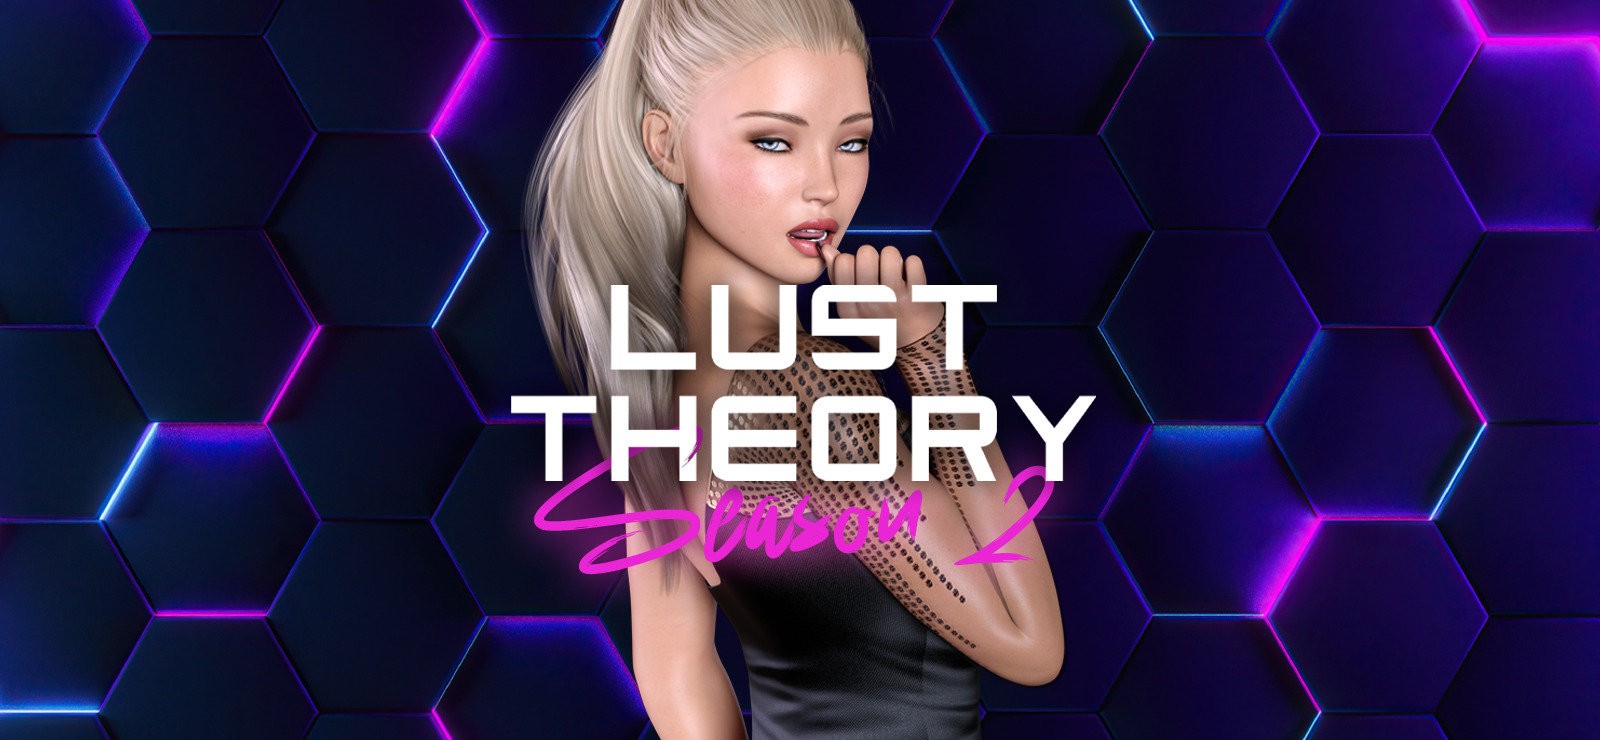 Lust theory 2